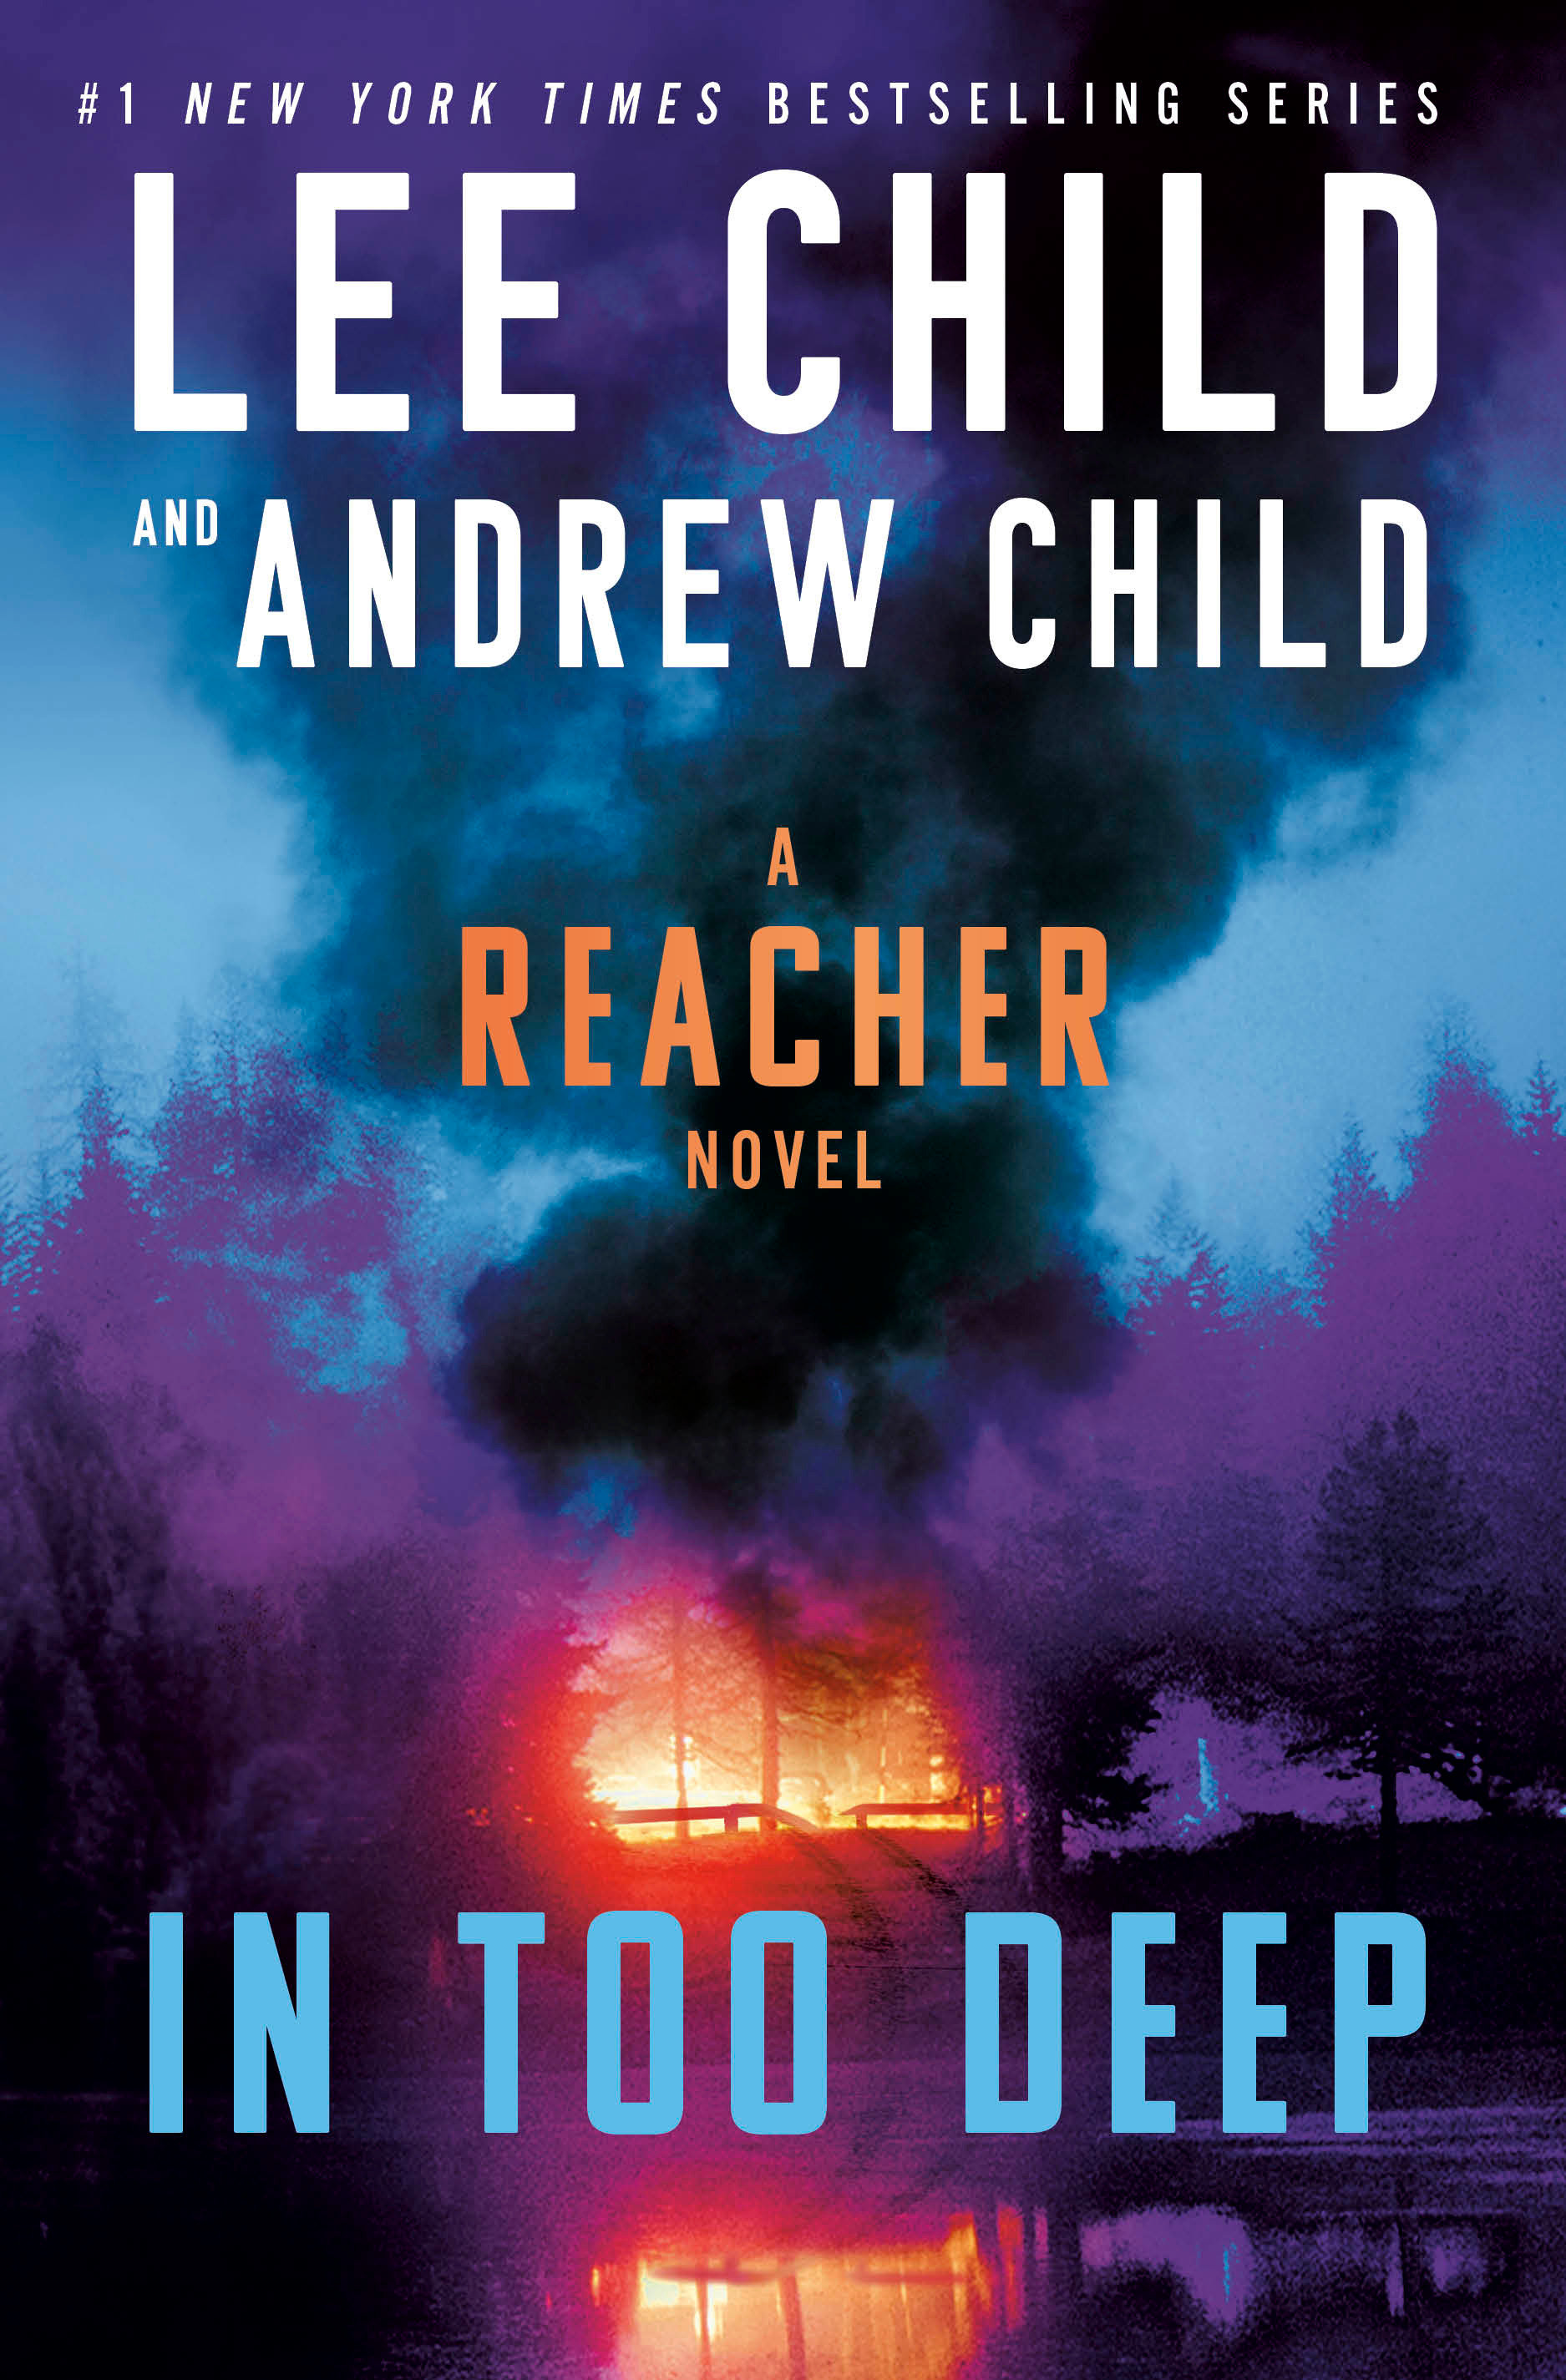 In Too Deep A Jack Reacher Novel cover image